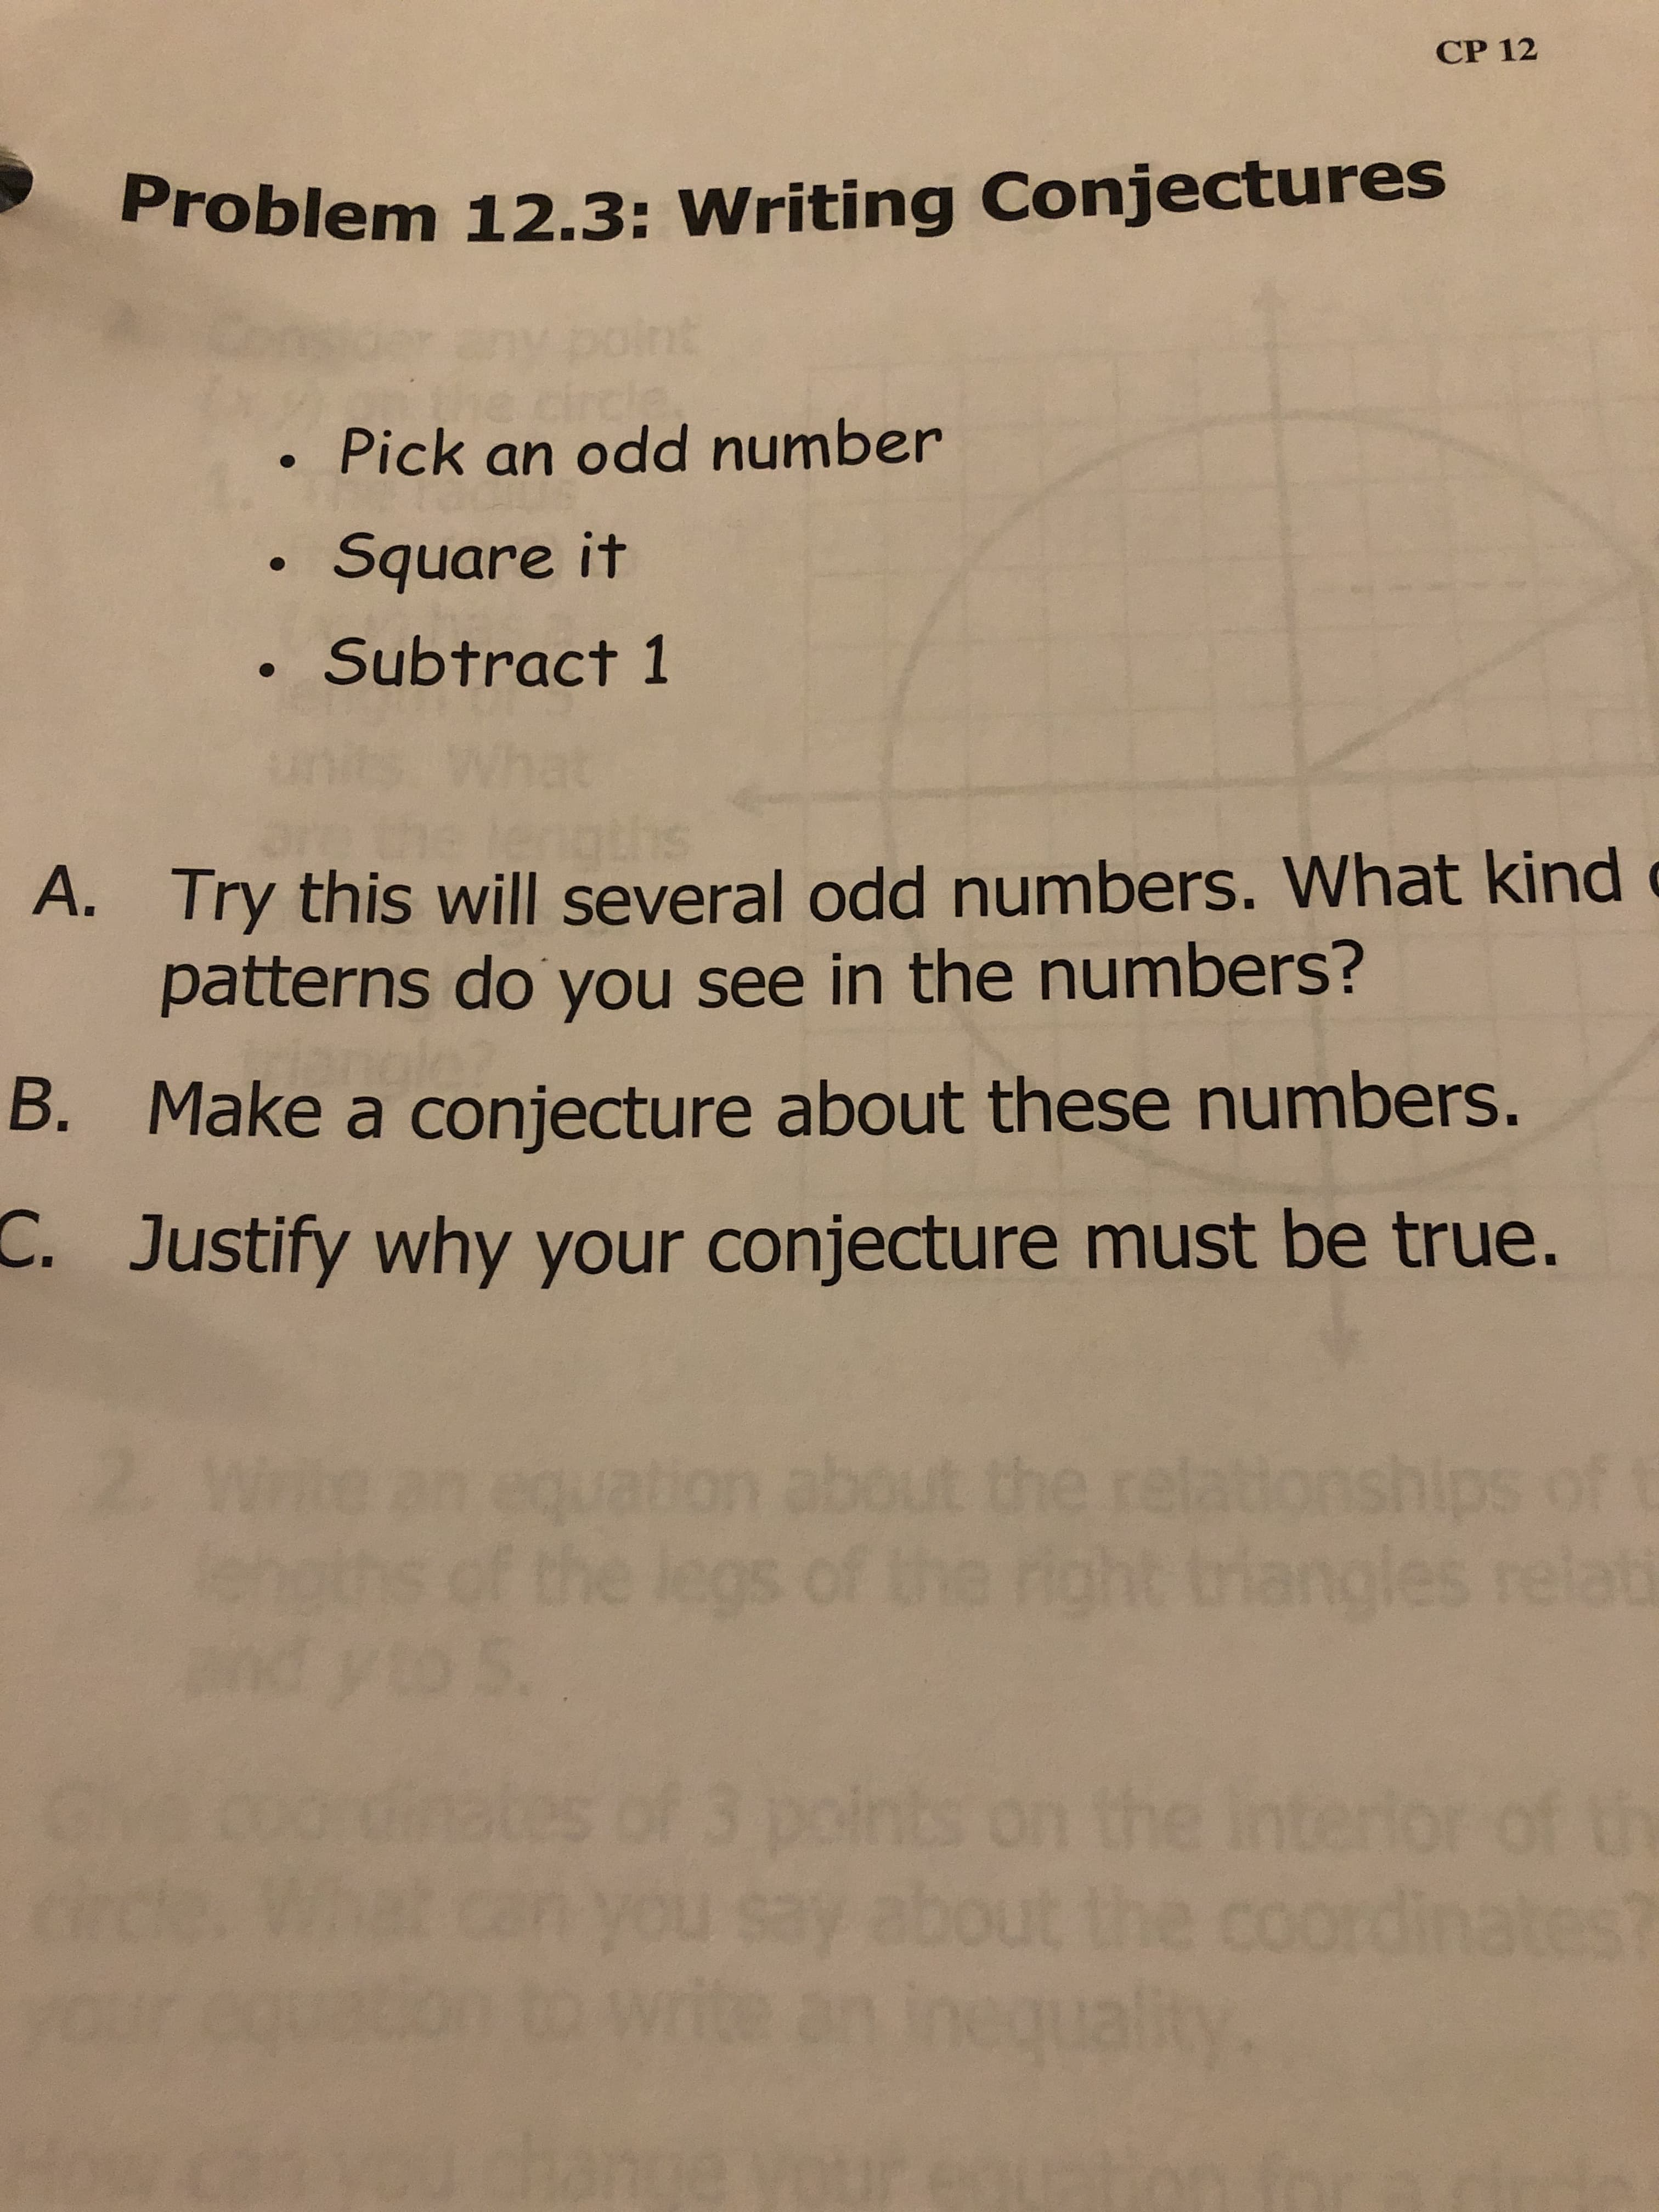 CP 12
Problem 12.3: Writing Conjectures
nt
Pick an odd number
Square it
Subtract 1
gths
A. Try this will several odd numbers. What kind
patterns do you see in the numbers?
B. Make a conjecture about these numbers.
C. Justify why your conjecture must be true.
2.
tion about the relationships
fthe legs of the righ
nangles relat
n the in
u Say about the coordinate
al
3 point
of th
wite
